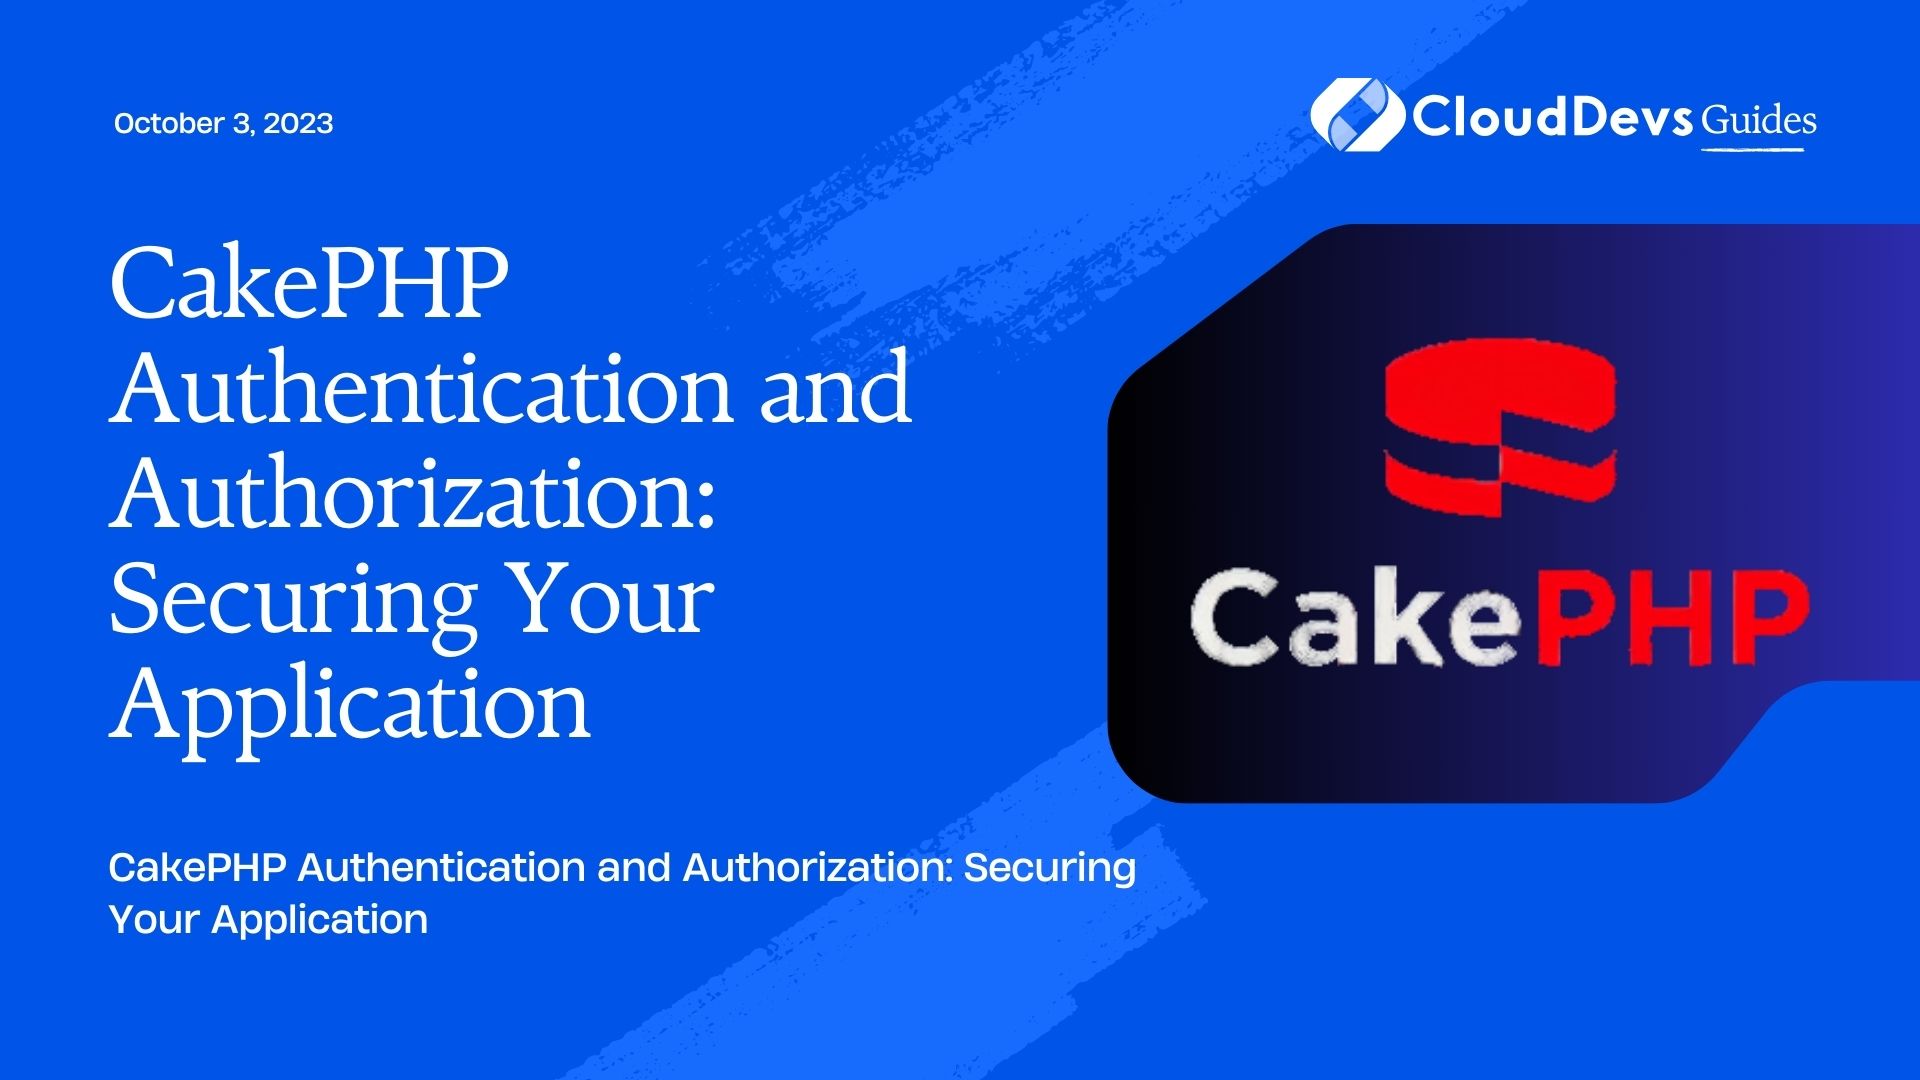 CakePHP Authentication and Authorization: Securing Your Application